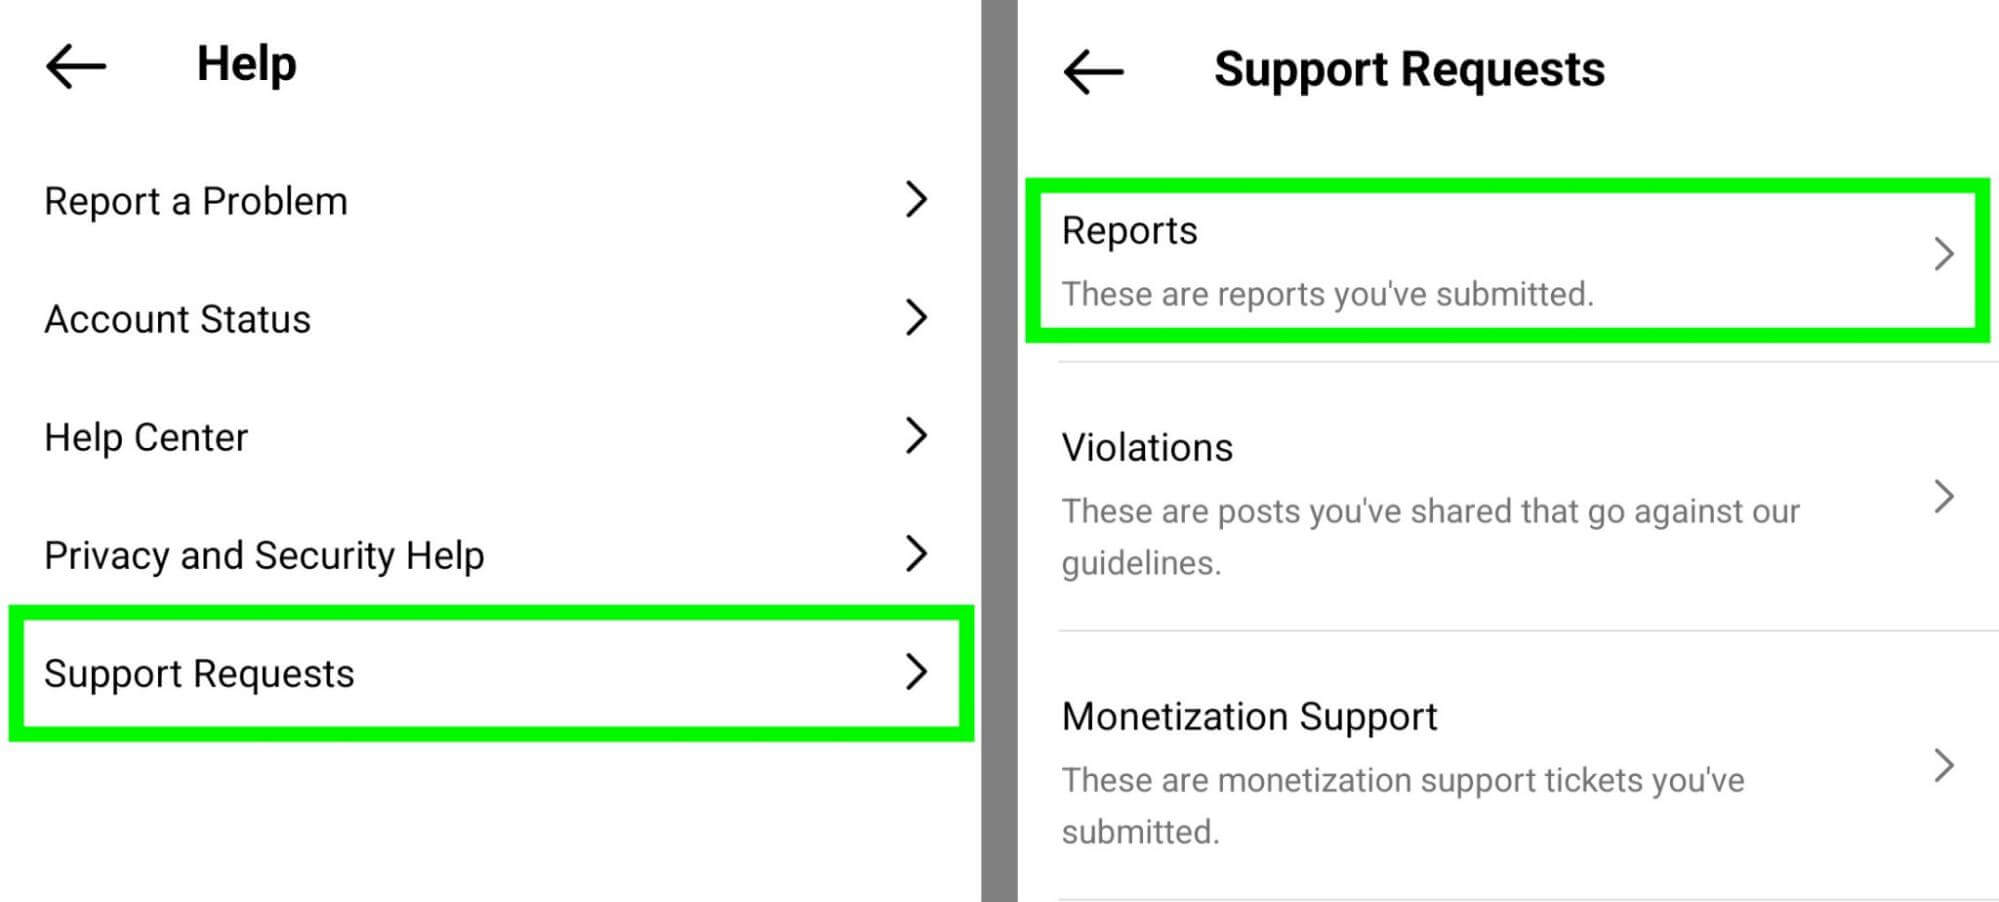 how-to-monitor-instagram-impersonation-reports-track-imposter-profile-settings-help-tap-support-requests-open-reports-inbox-review-status-example-10